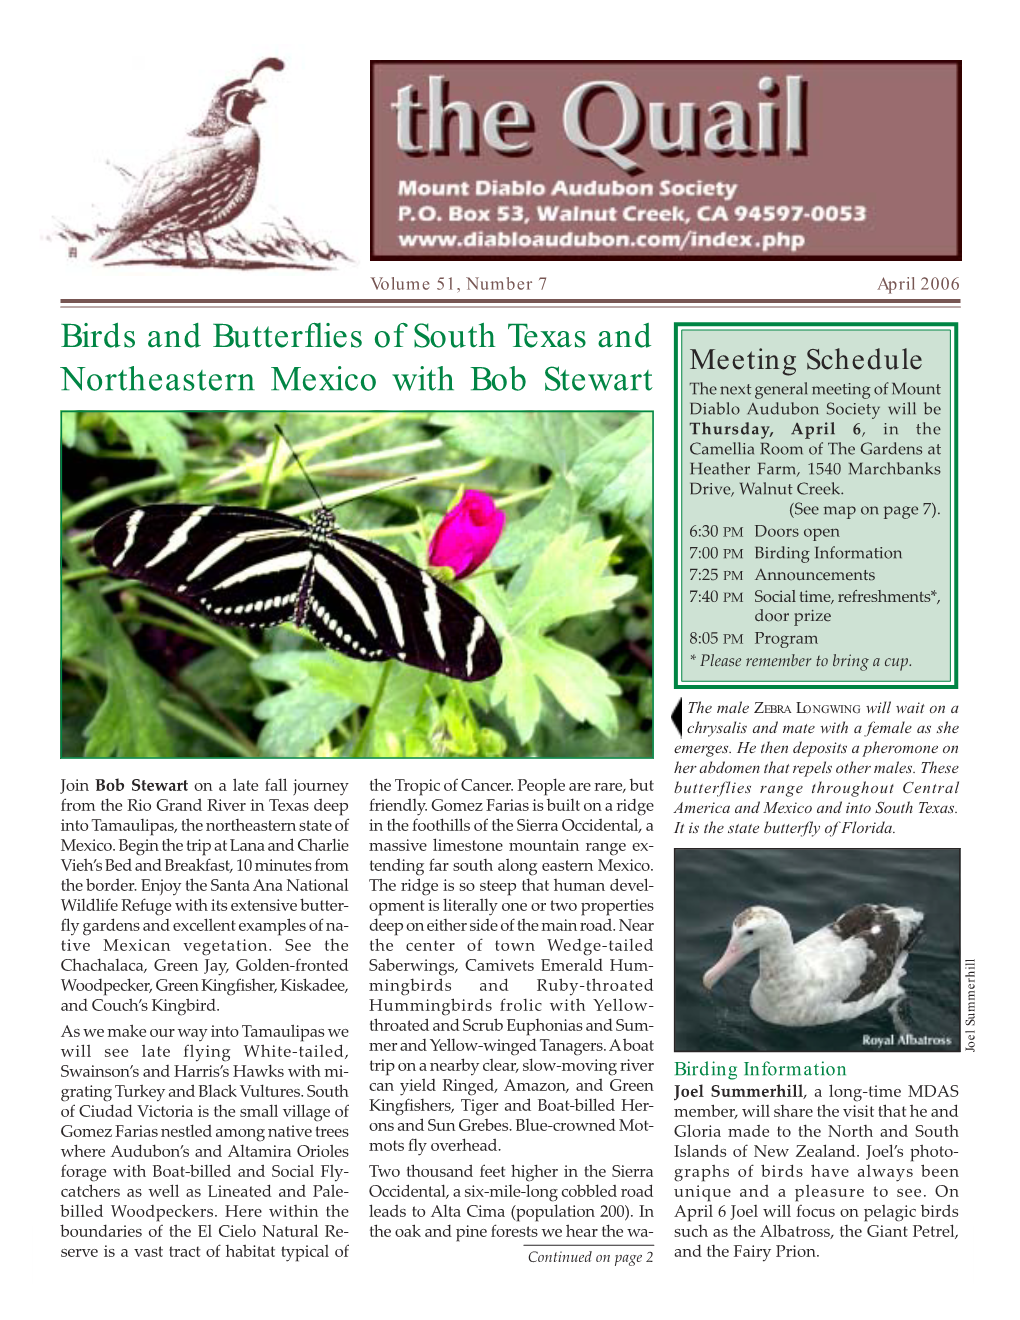 Birds and Butterflies of South Texas and Northeastern Mexico with Bob